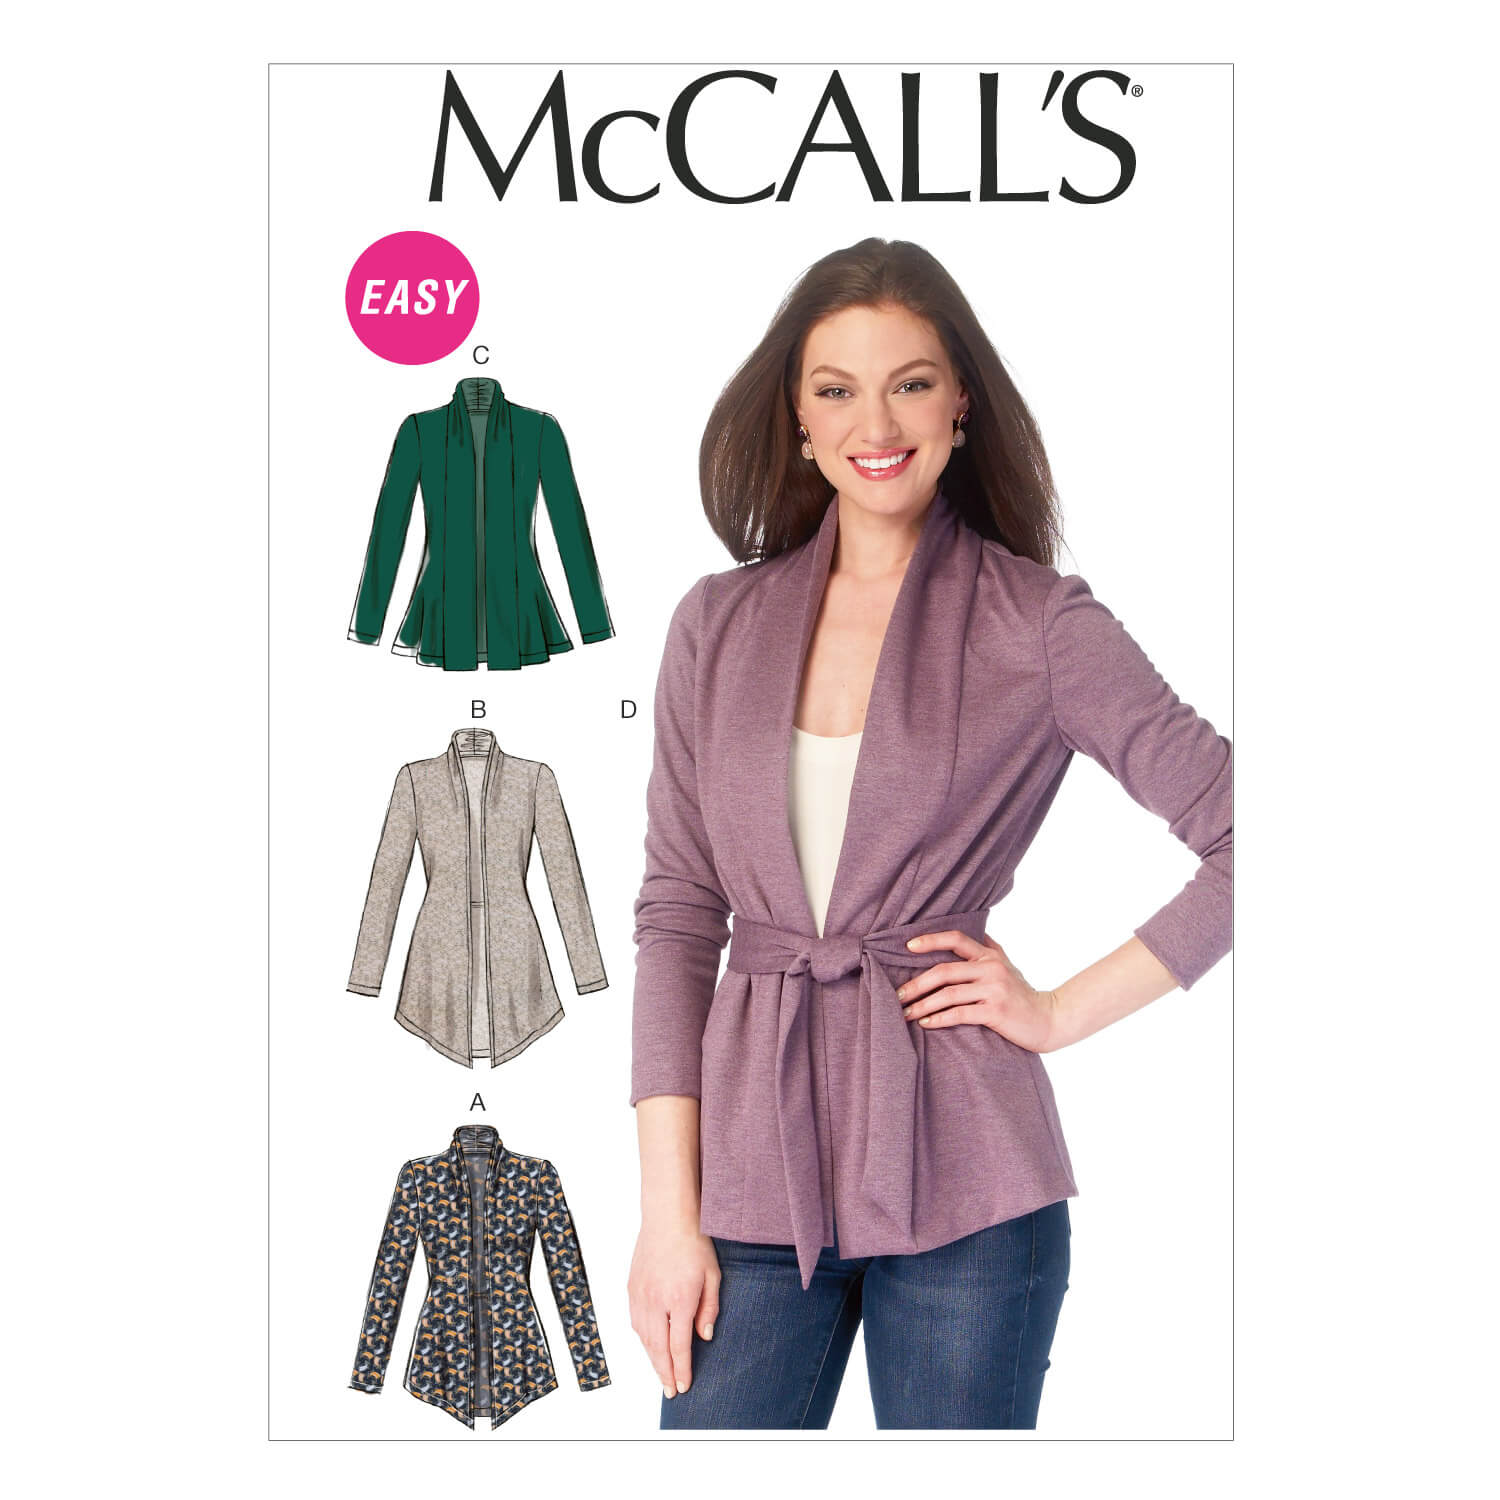 McCall's Sewing Pattern M6996 Misses' Jackets and Belt